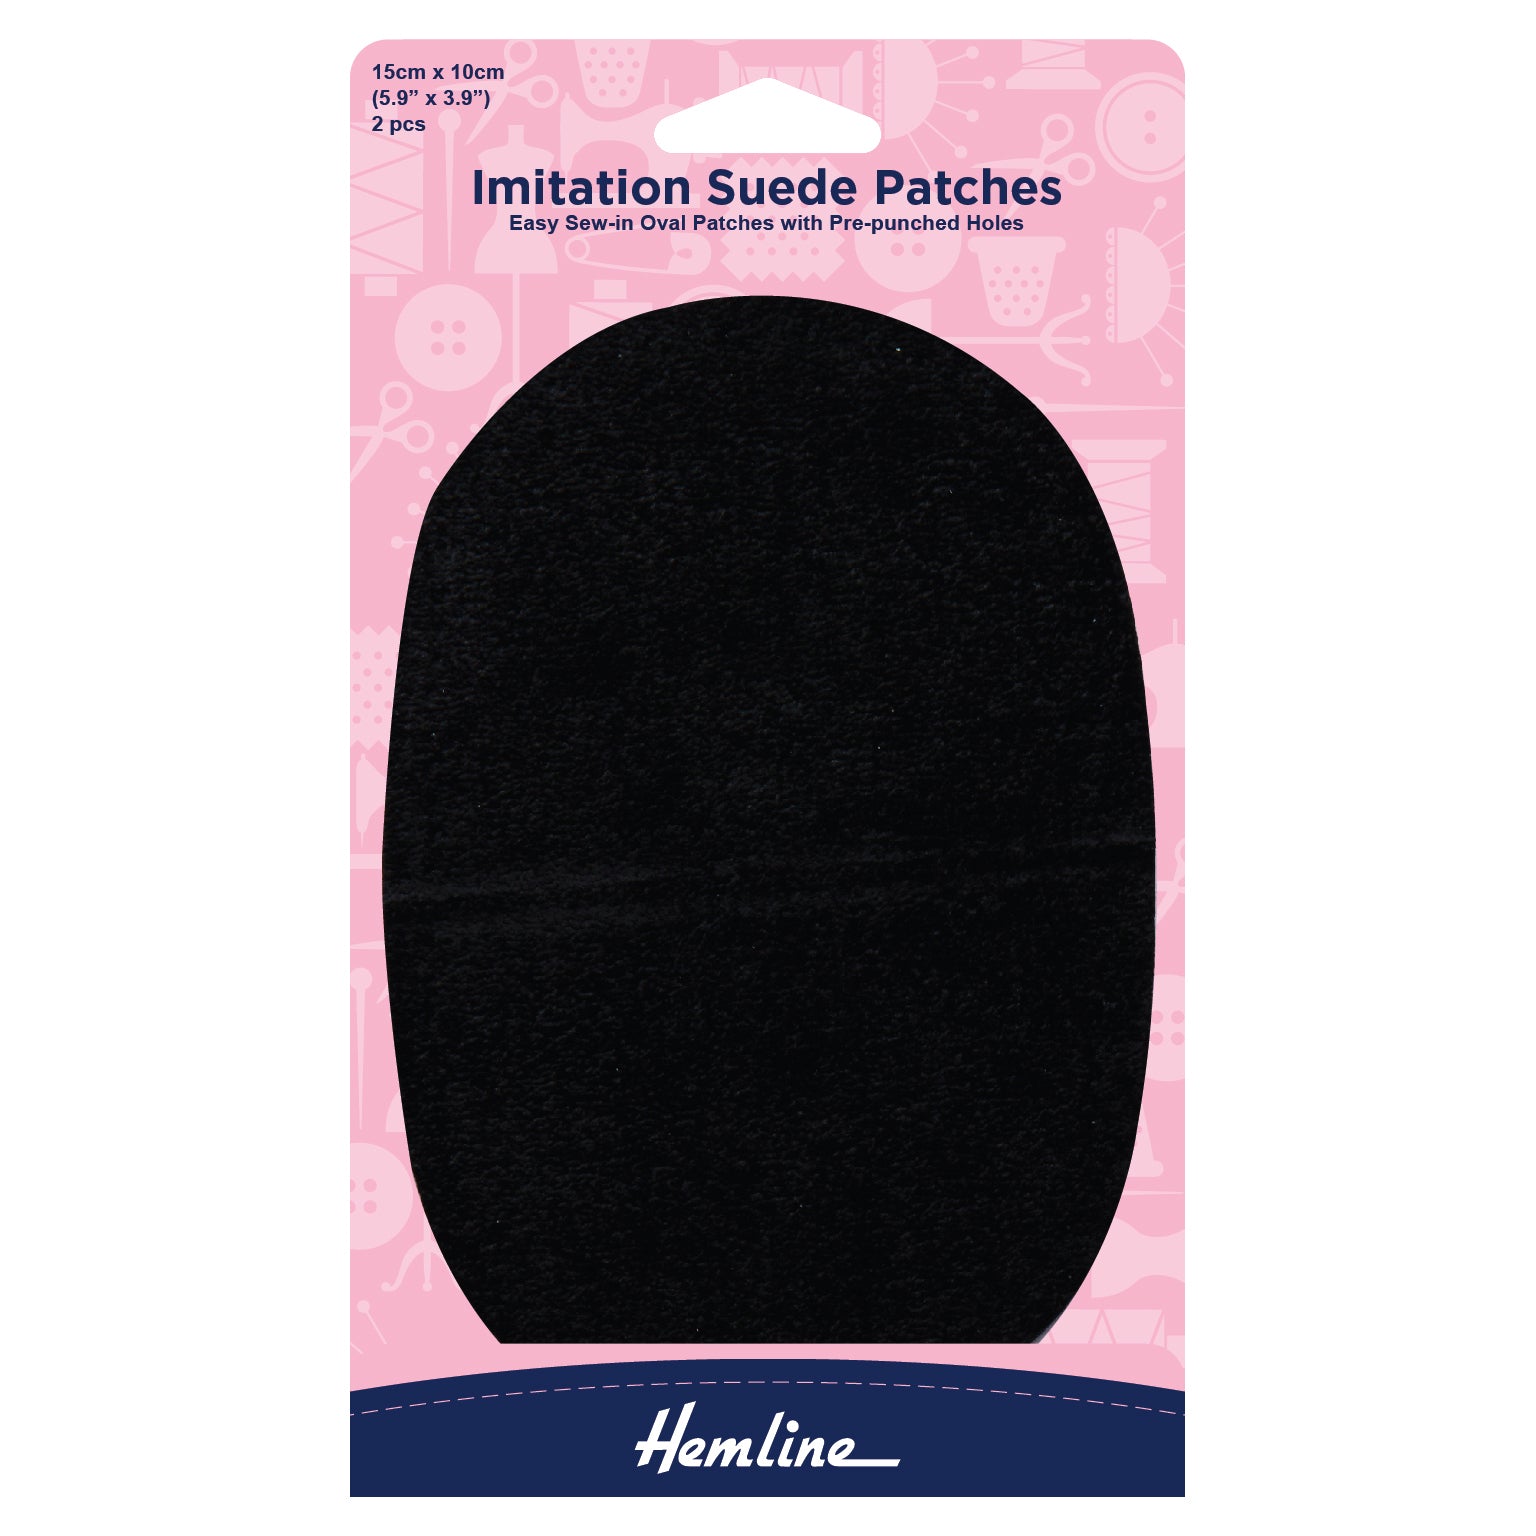 Hemline Imitation Suede Patches from Jaycotts Sewing Supplies